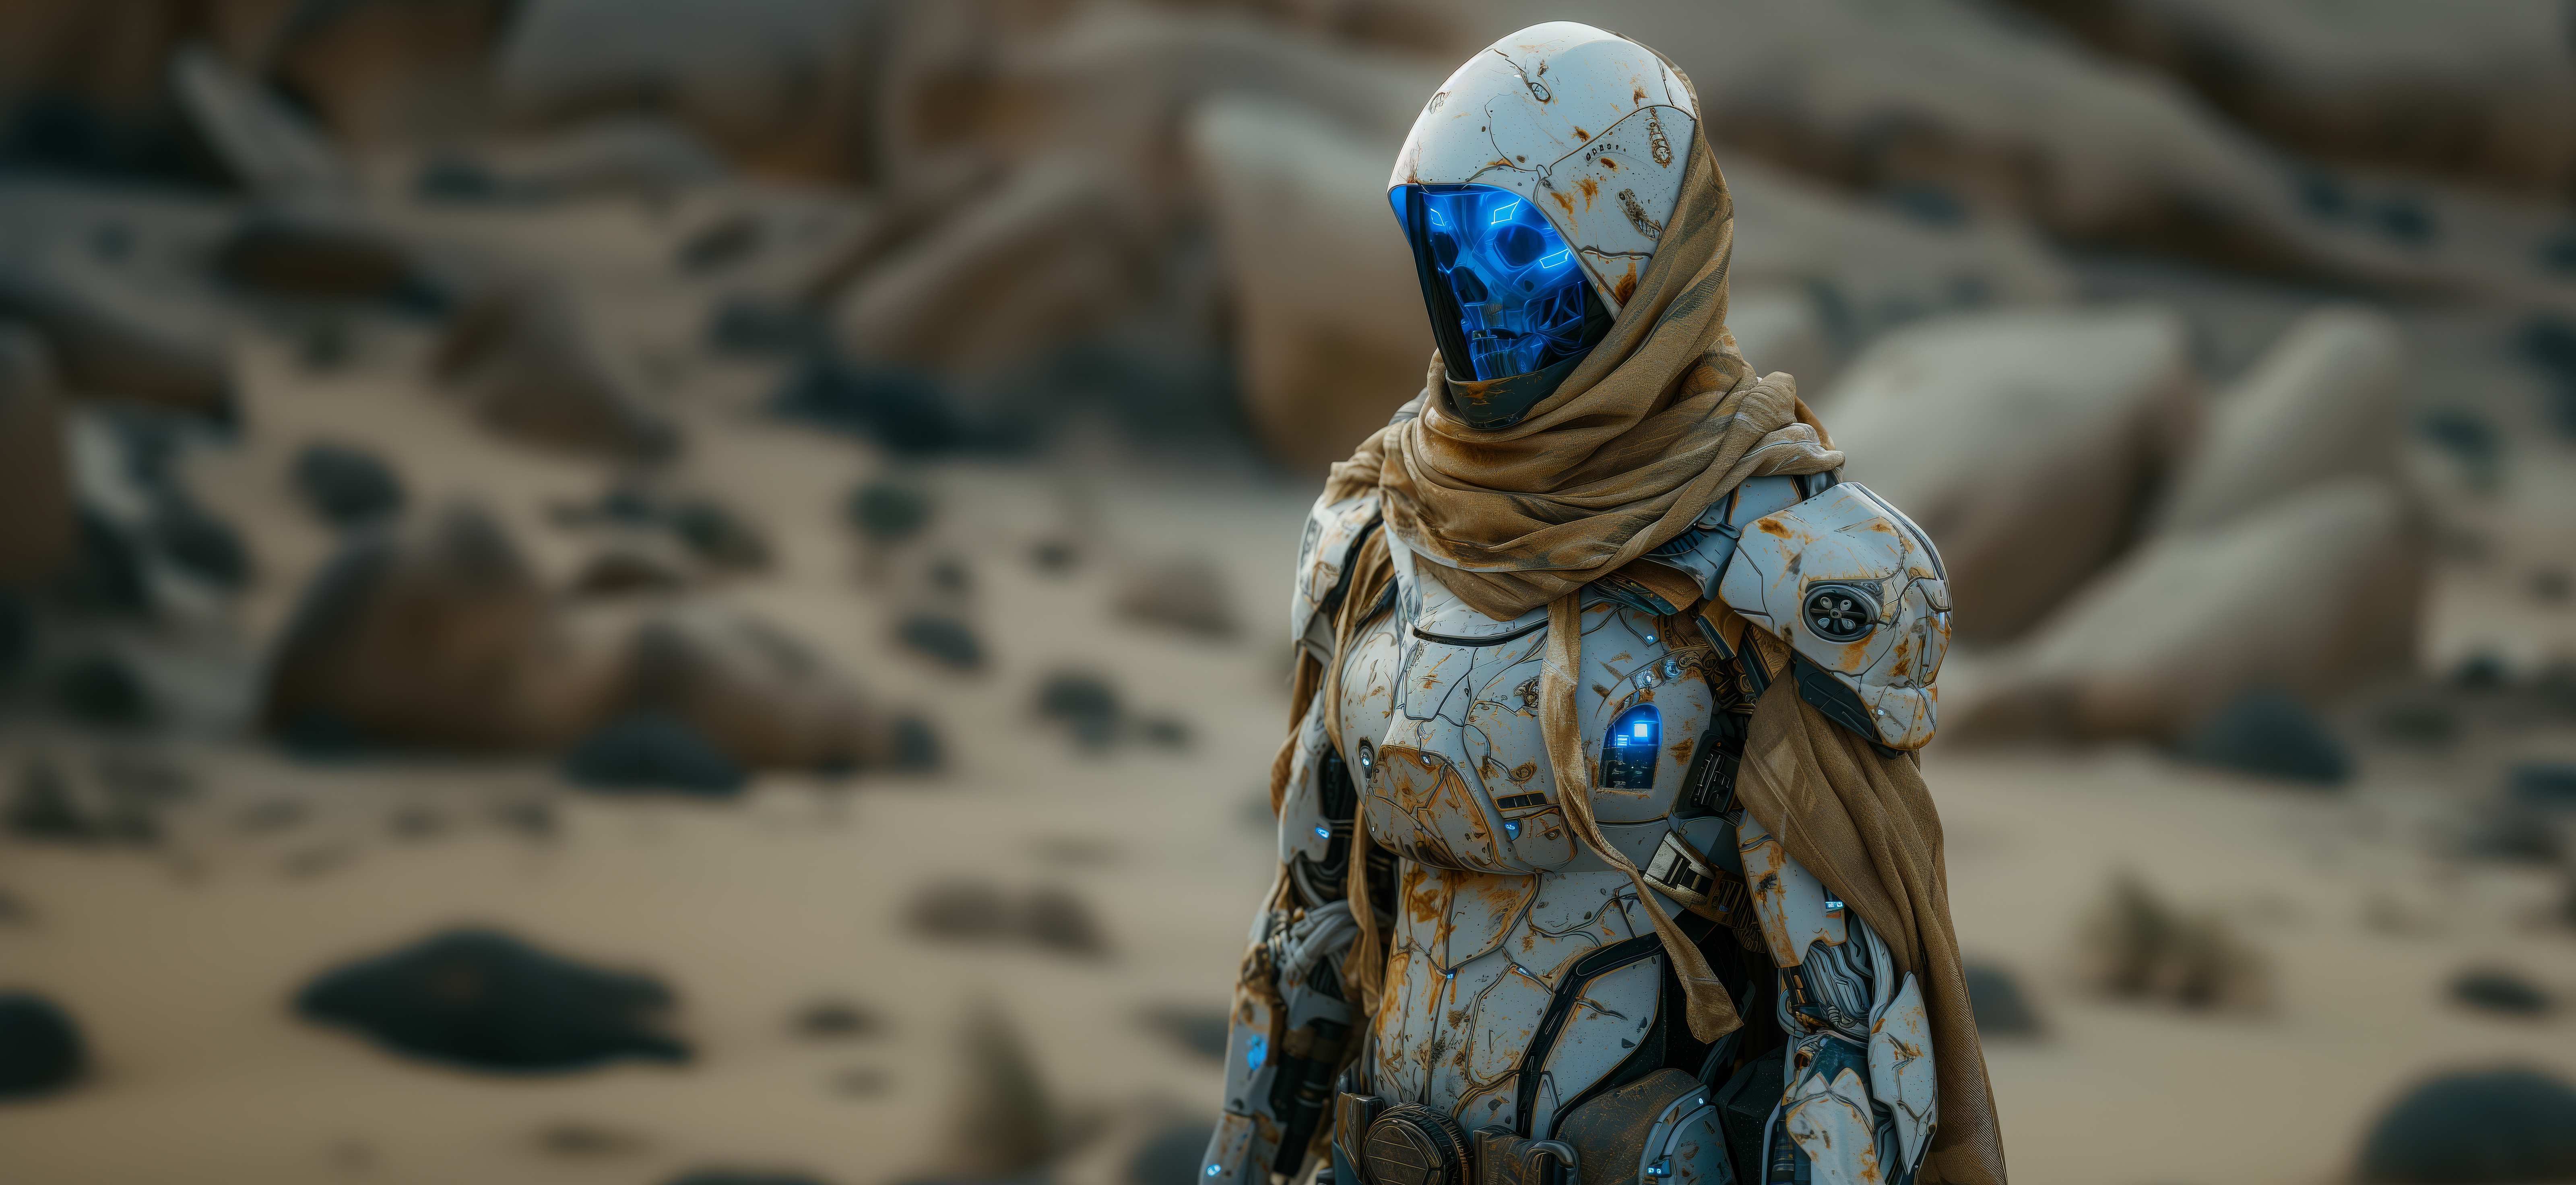 General 6400x2944 AI art skull blue science fiction desert character design  cloth blurred blurry background standing